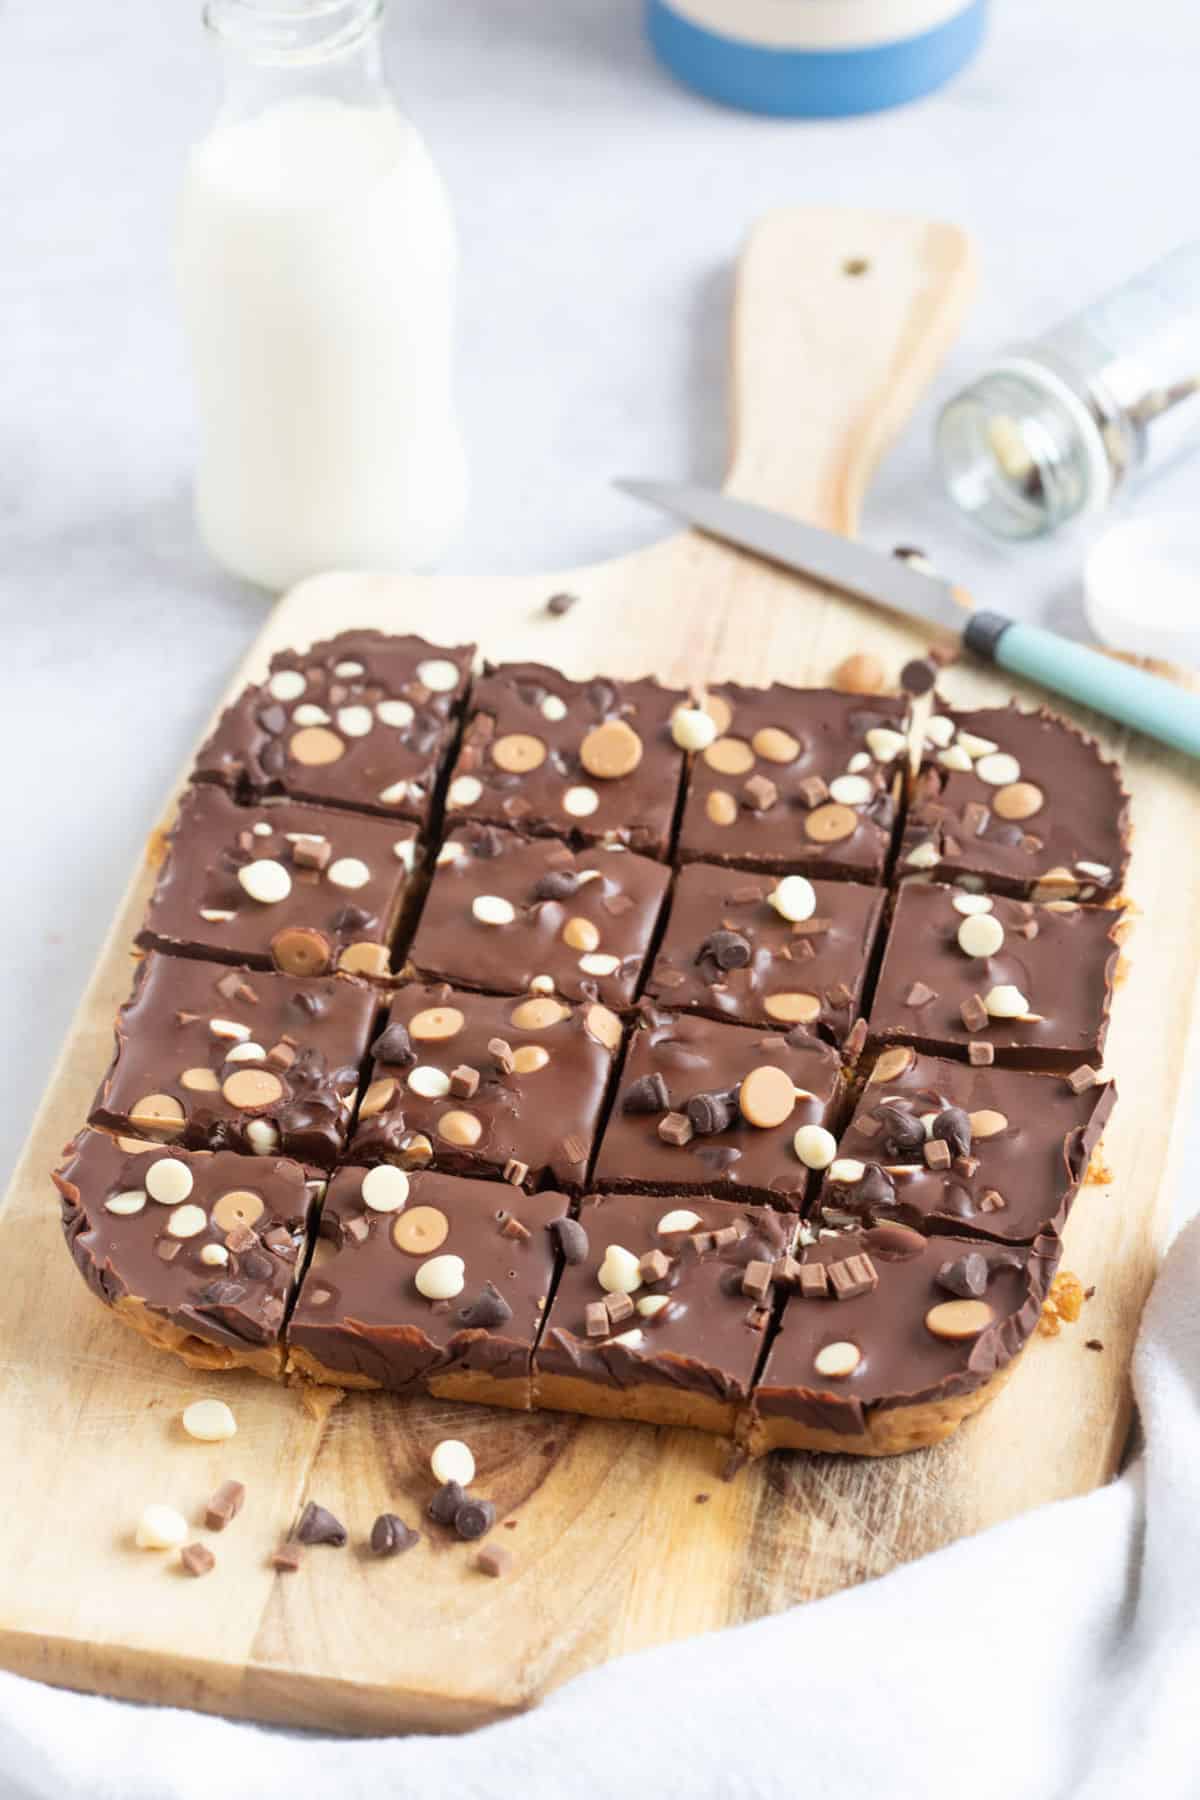 No bake chocolate peanut butter bars on a wooden board.